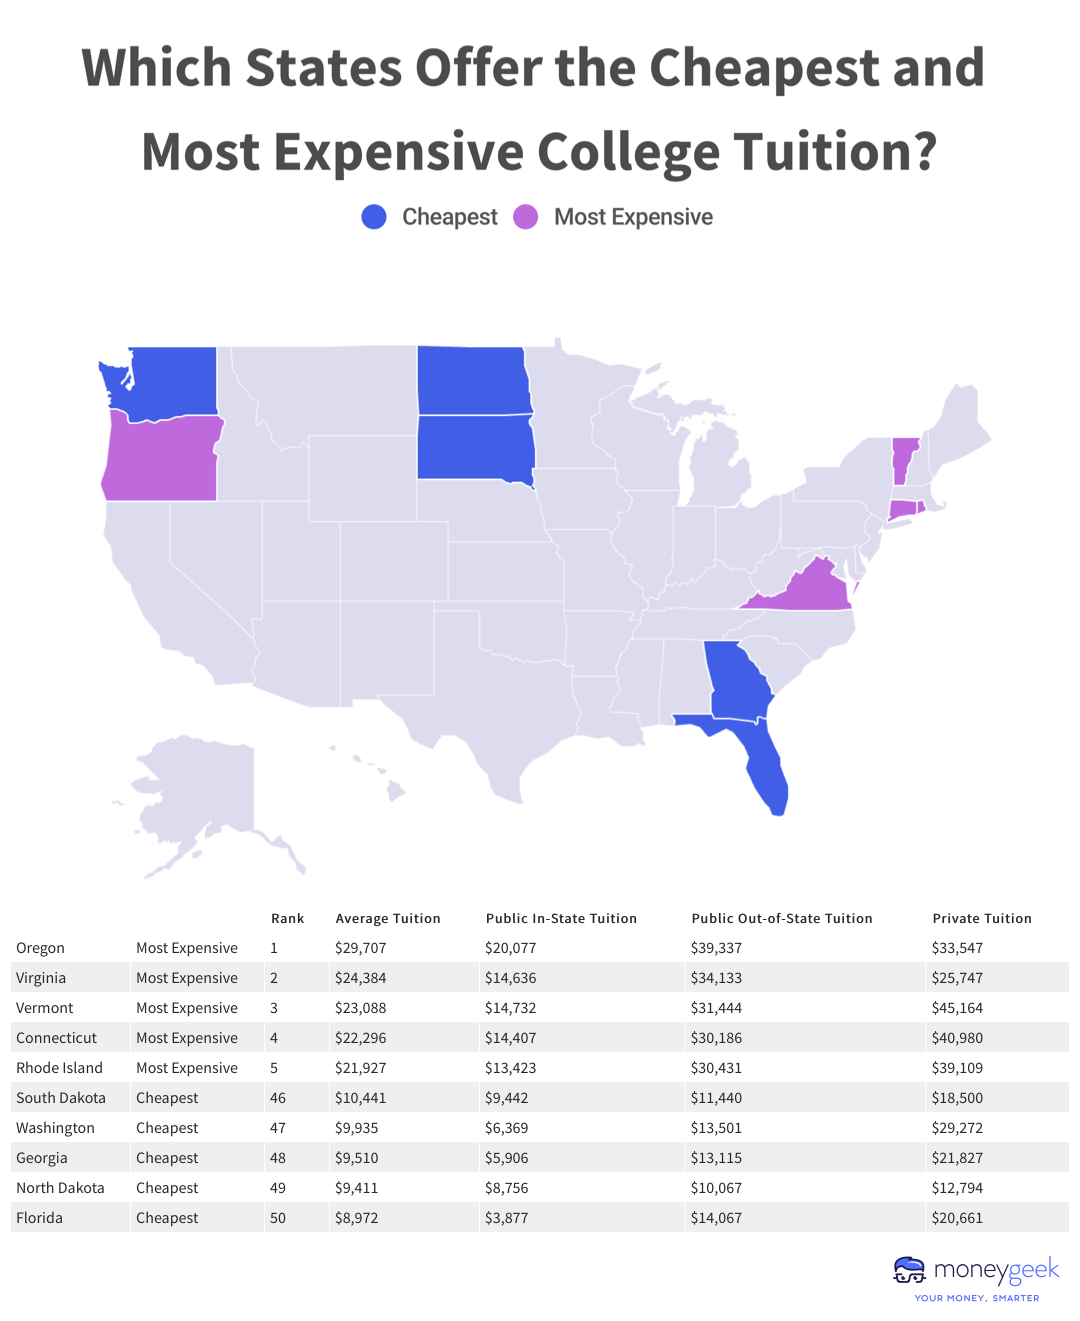 A US map showing the states that offer the cheapest and most expensive college tuition